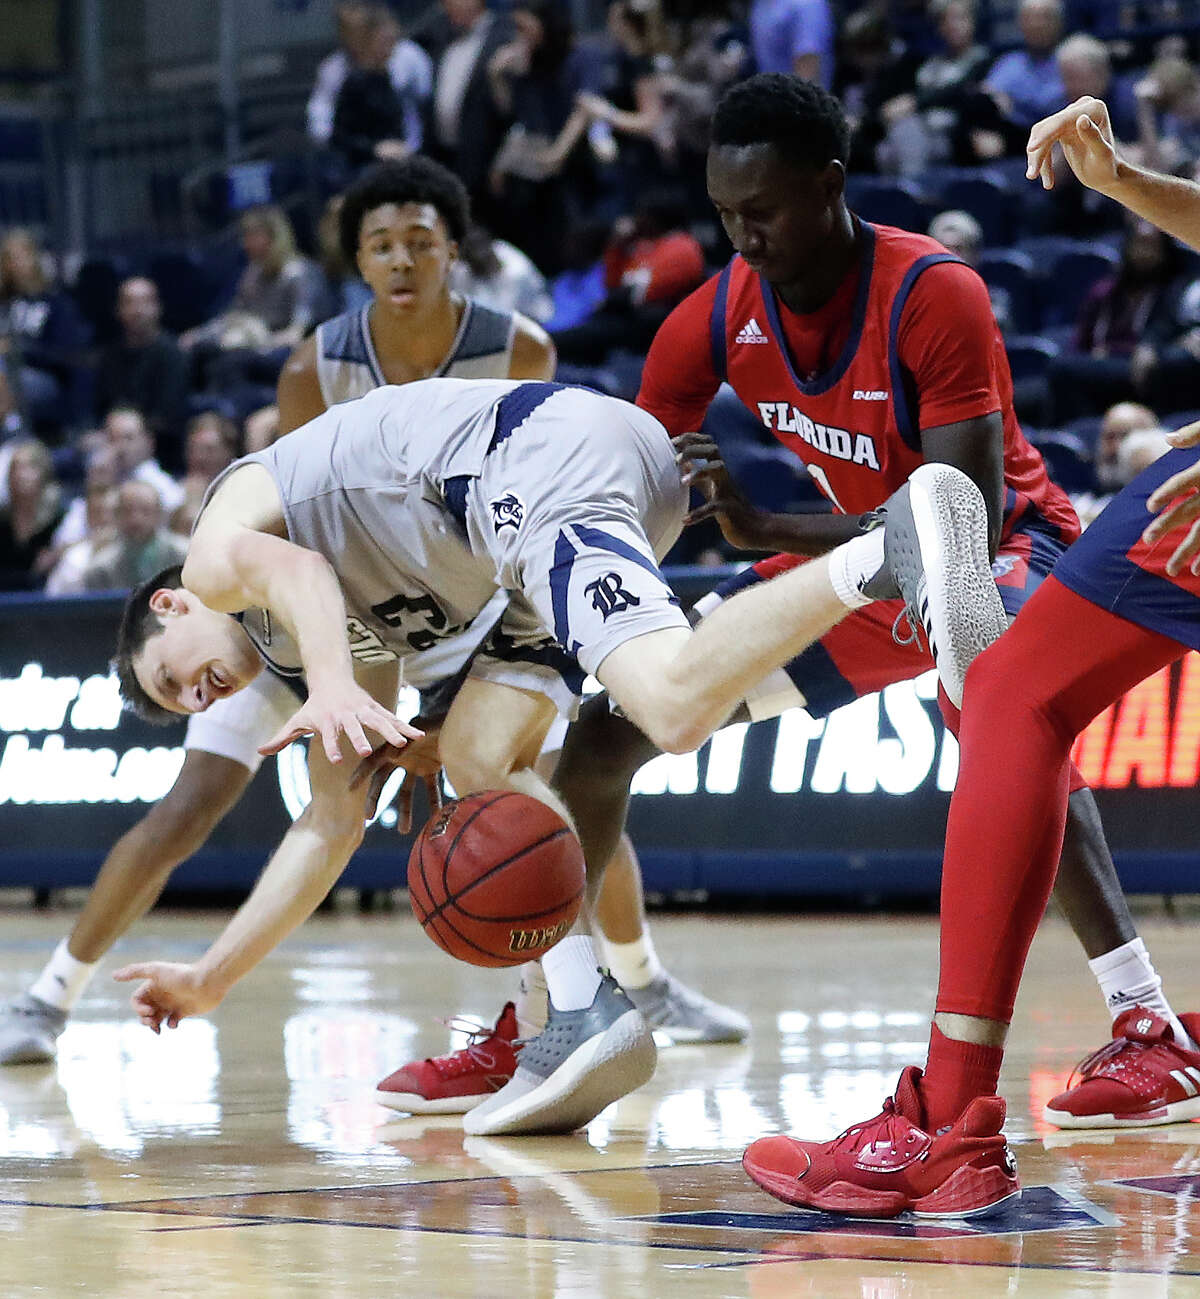 Rice Owls guard Drew Peterson (23) stumbles as he tries to stay in control of the ball against Florida Atlantic Owls forward Madiaw Niang (1) during the first half of an NCAA men's college basketball game at Tudor Fieldhouse Thursday, Jan. 9, 2020, in Houston.